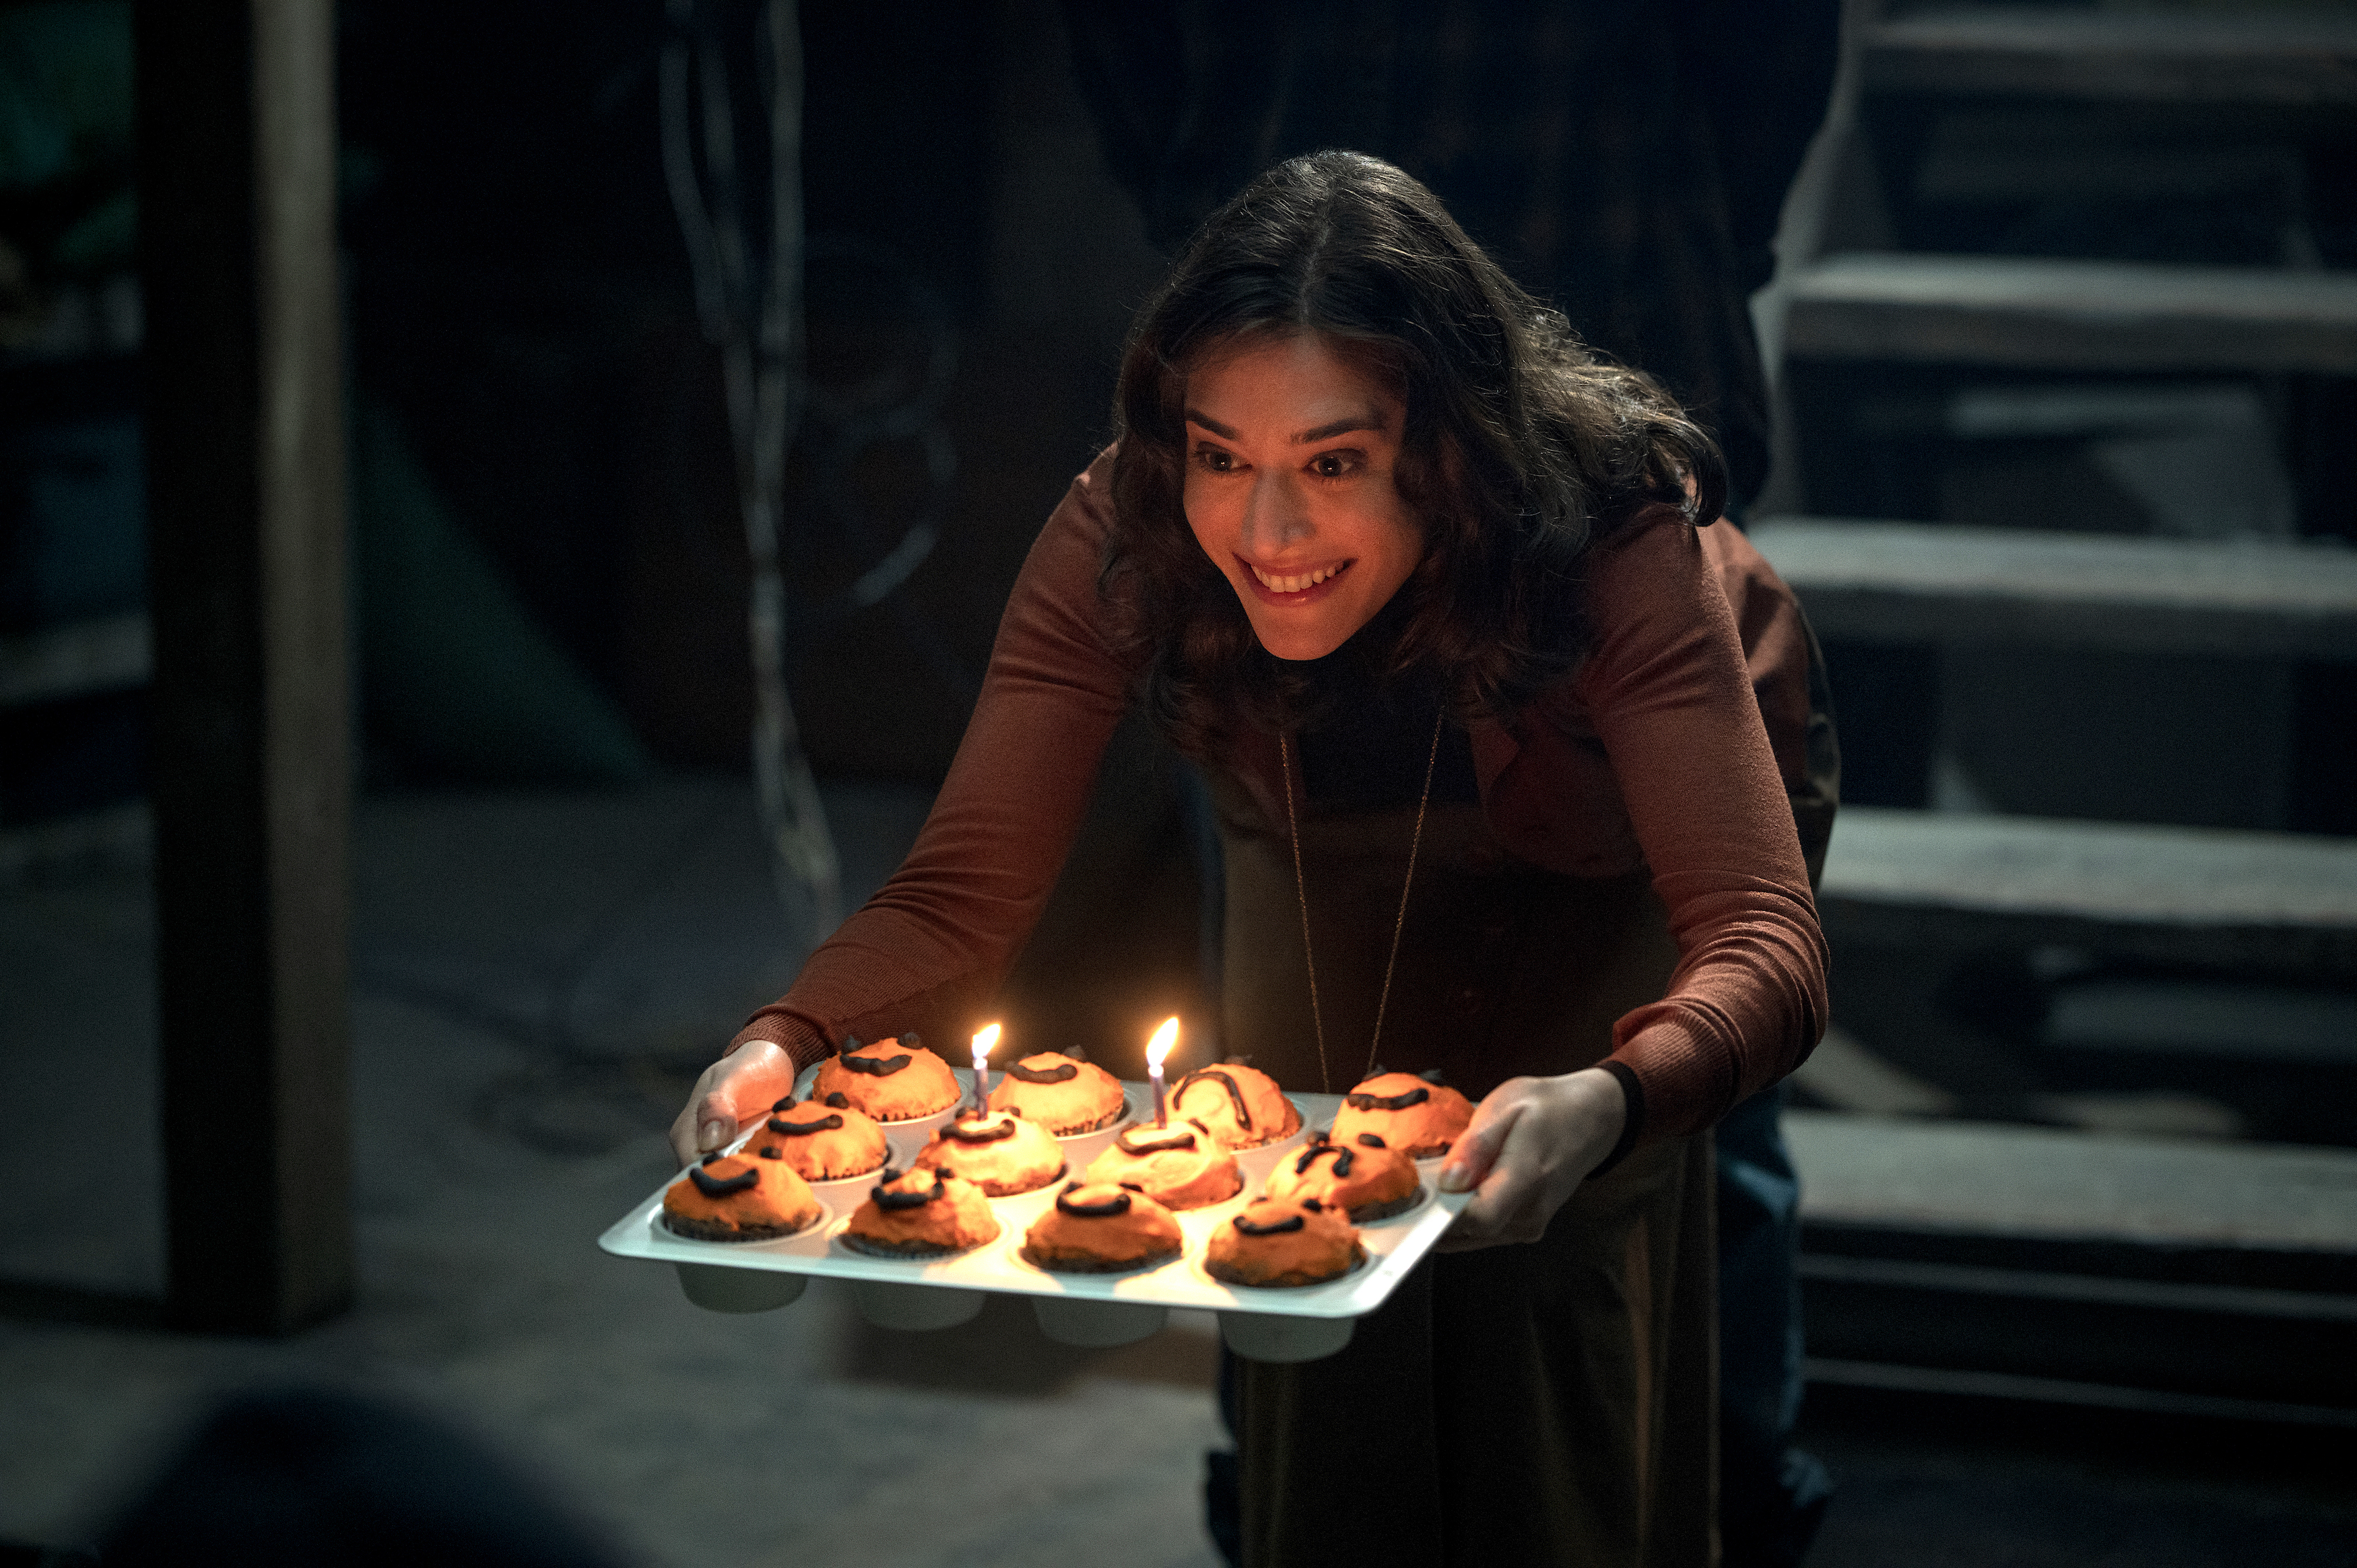 Lizzy Caplan creepily offers a tray of cupcakes, some with small birthday candles, to someone offscreen in the horror movie Cobweb